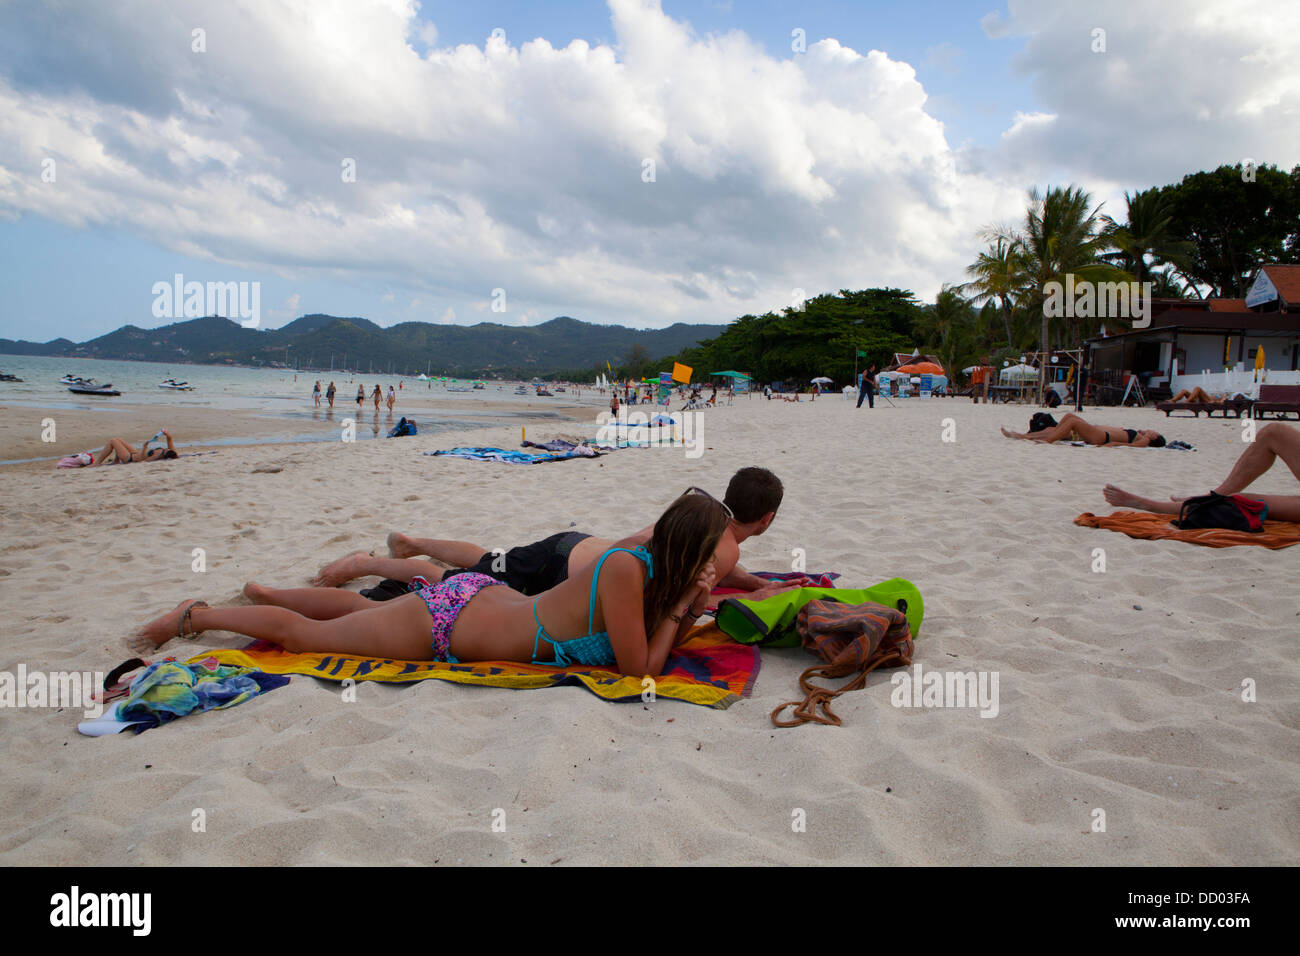 A couple sunbathes Hat Chaweng Beach on Ko Samui Island in the Gulf of Thailand. Stock Photo